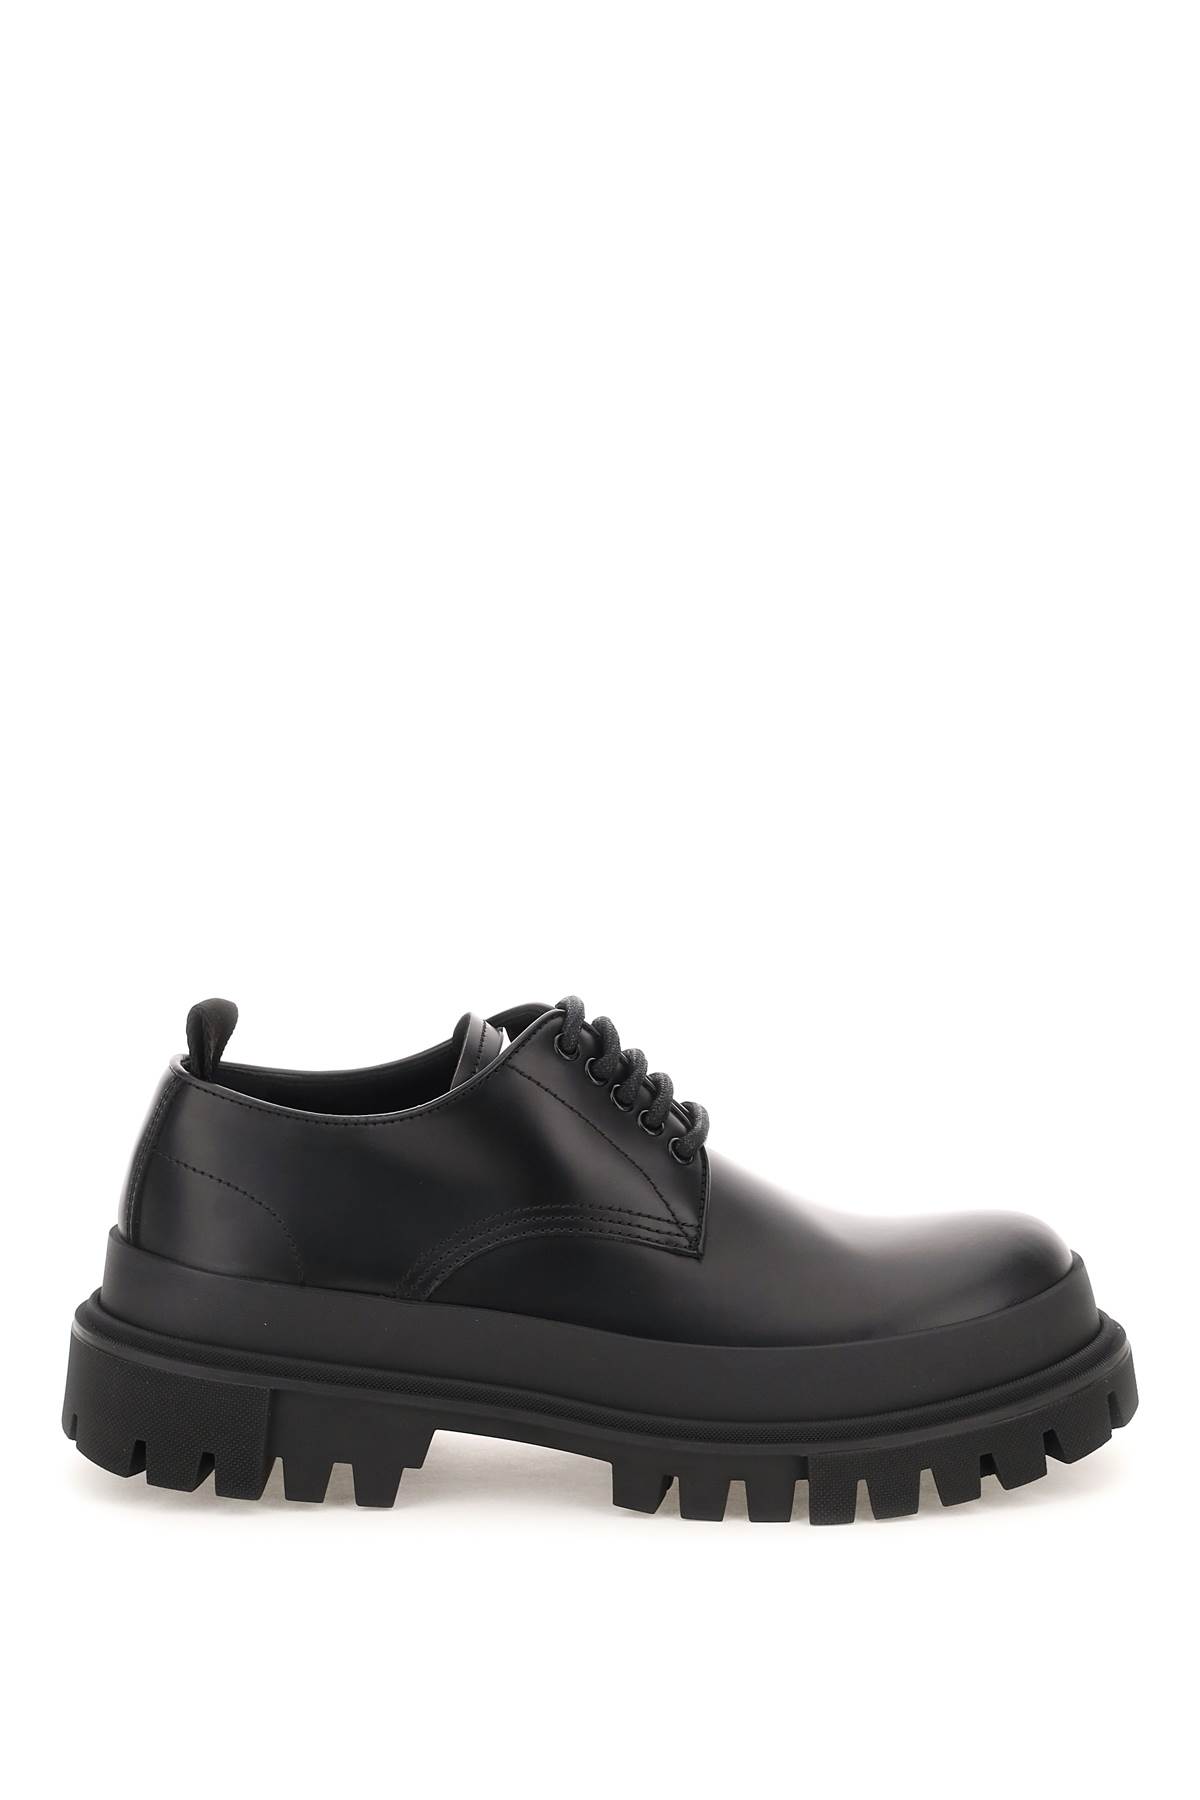 DOLCE & GABBANA LEATHER LACE-UP SHOES WITH LUG SOLE